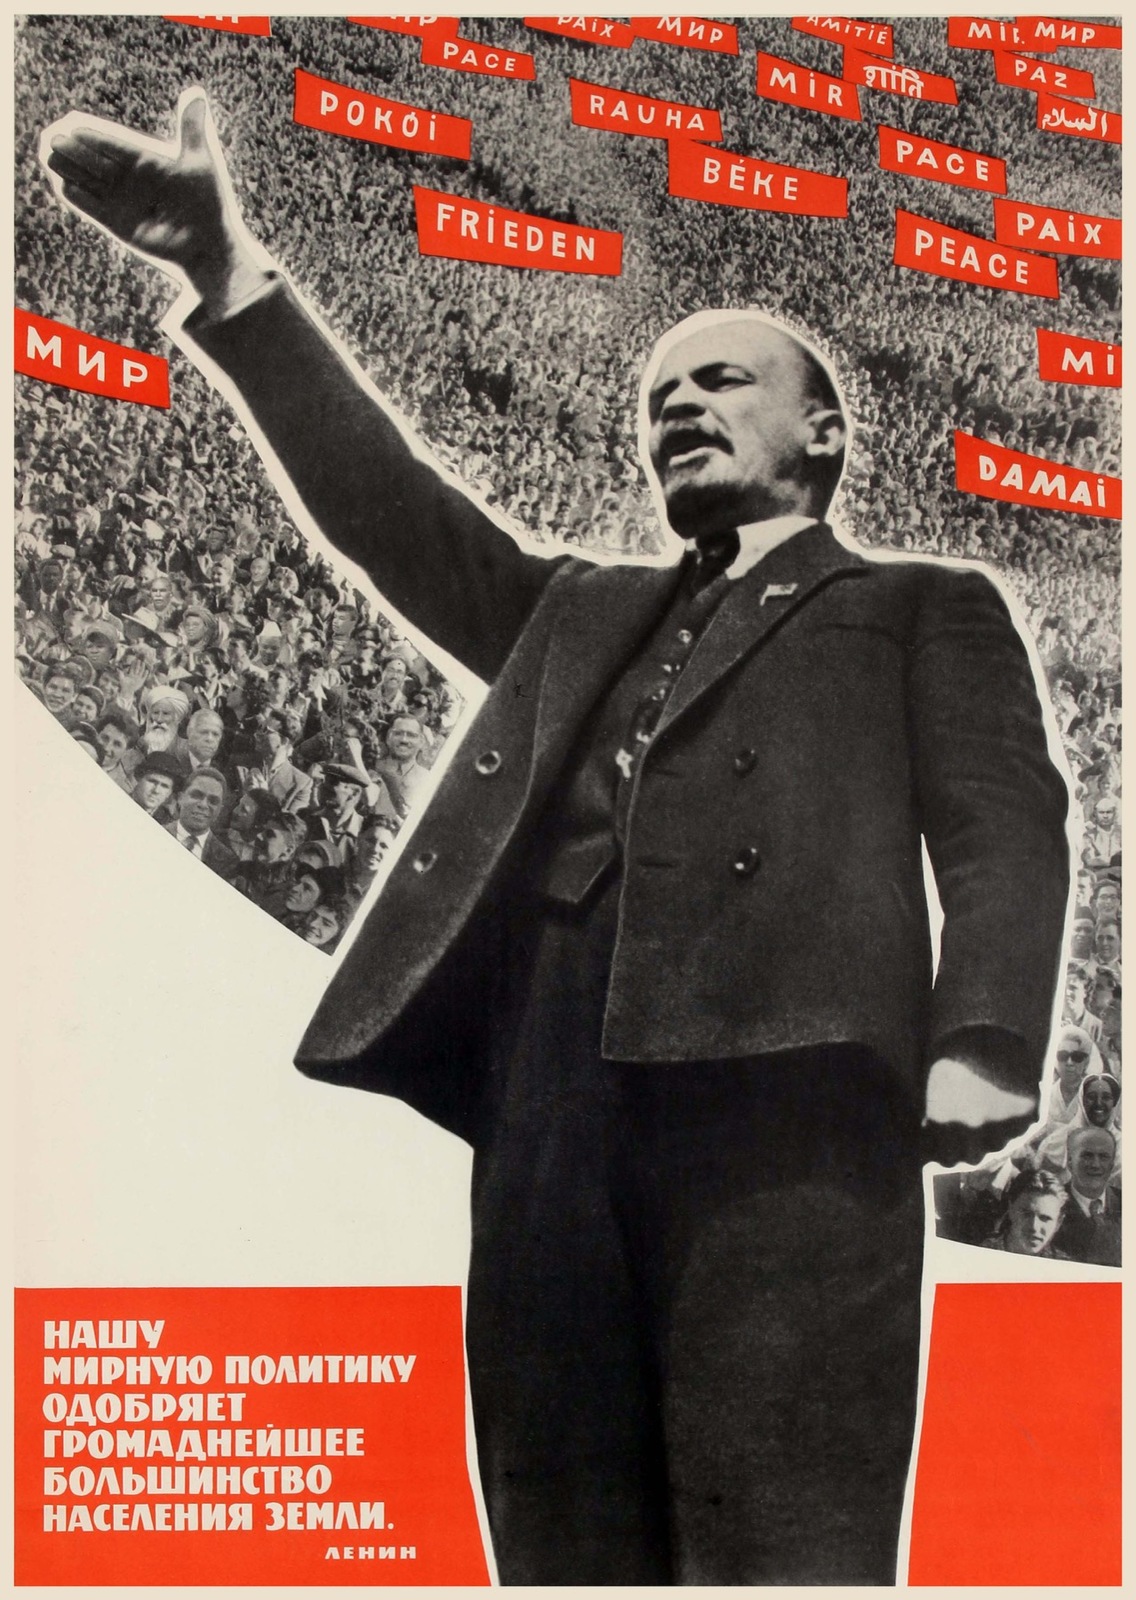 Primary image for 8709.Decoration Poster.Home Room wall art design.Russian Lenin.USSR Soviet ad